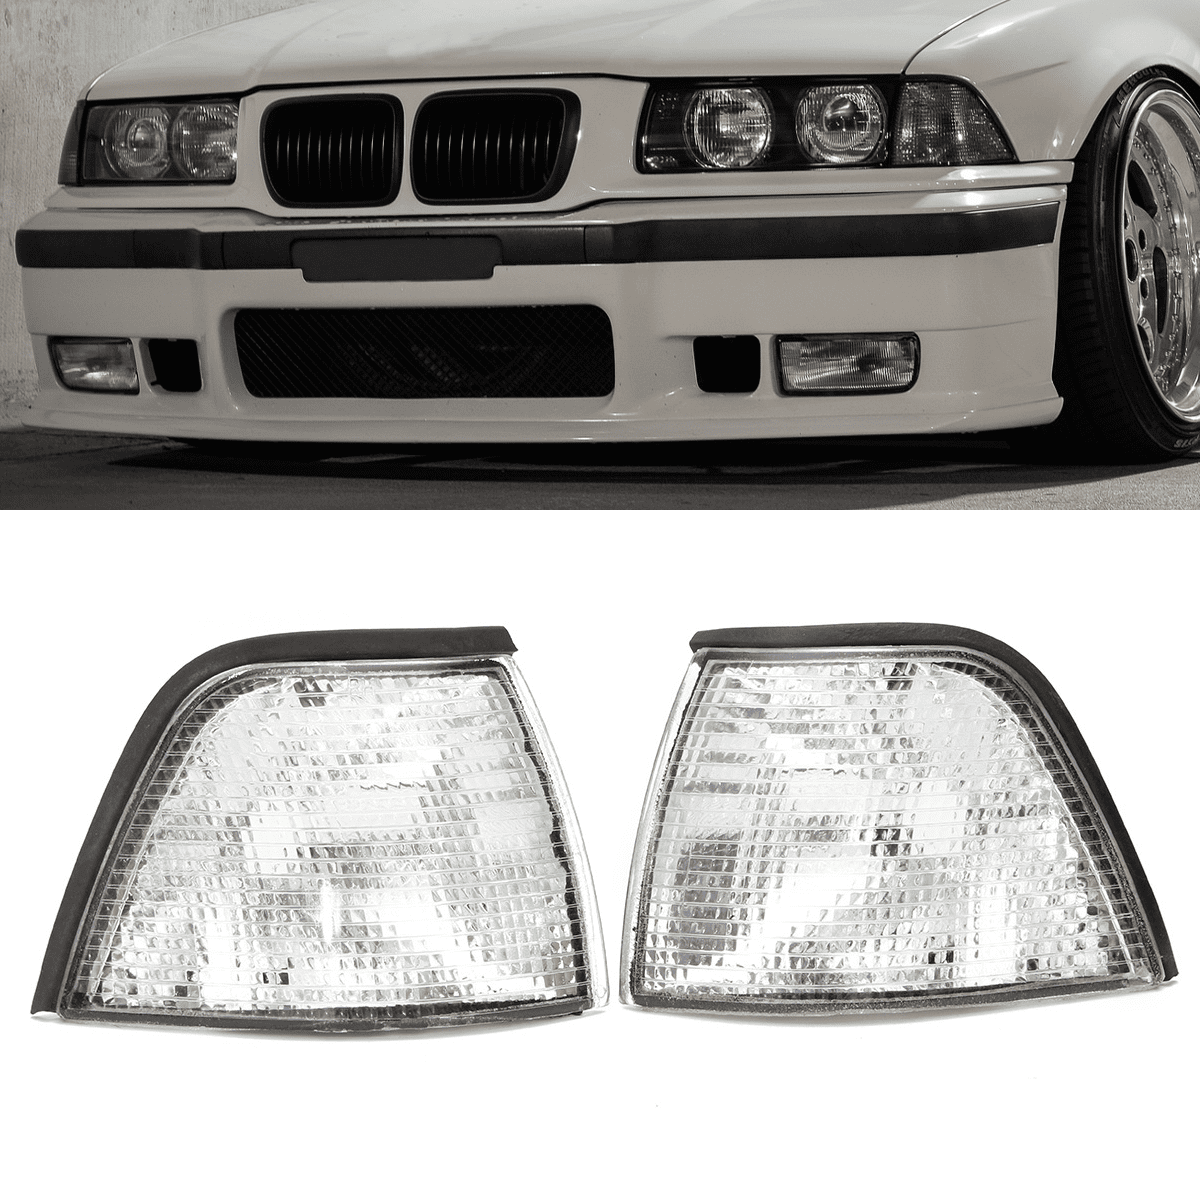 does not fit Coupe/Convertible 1 Pair of Corner Light Covers White Corner Light Cover for 3 Series 318i 318ti 325i 328i M3 E36 4DR Sedan&Wagon 1992-1998. 